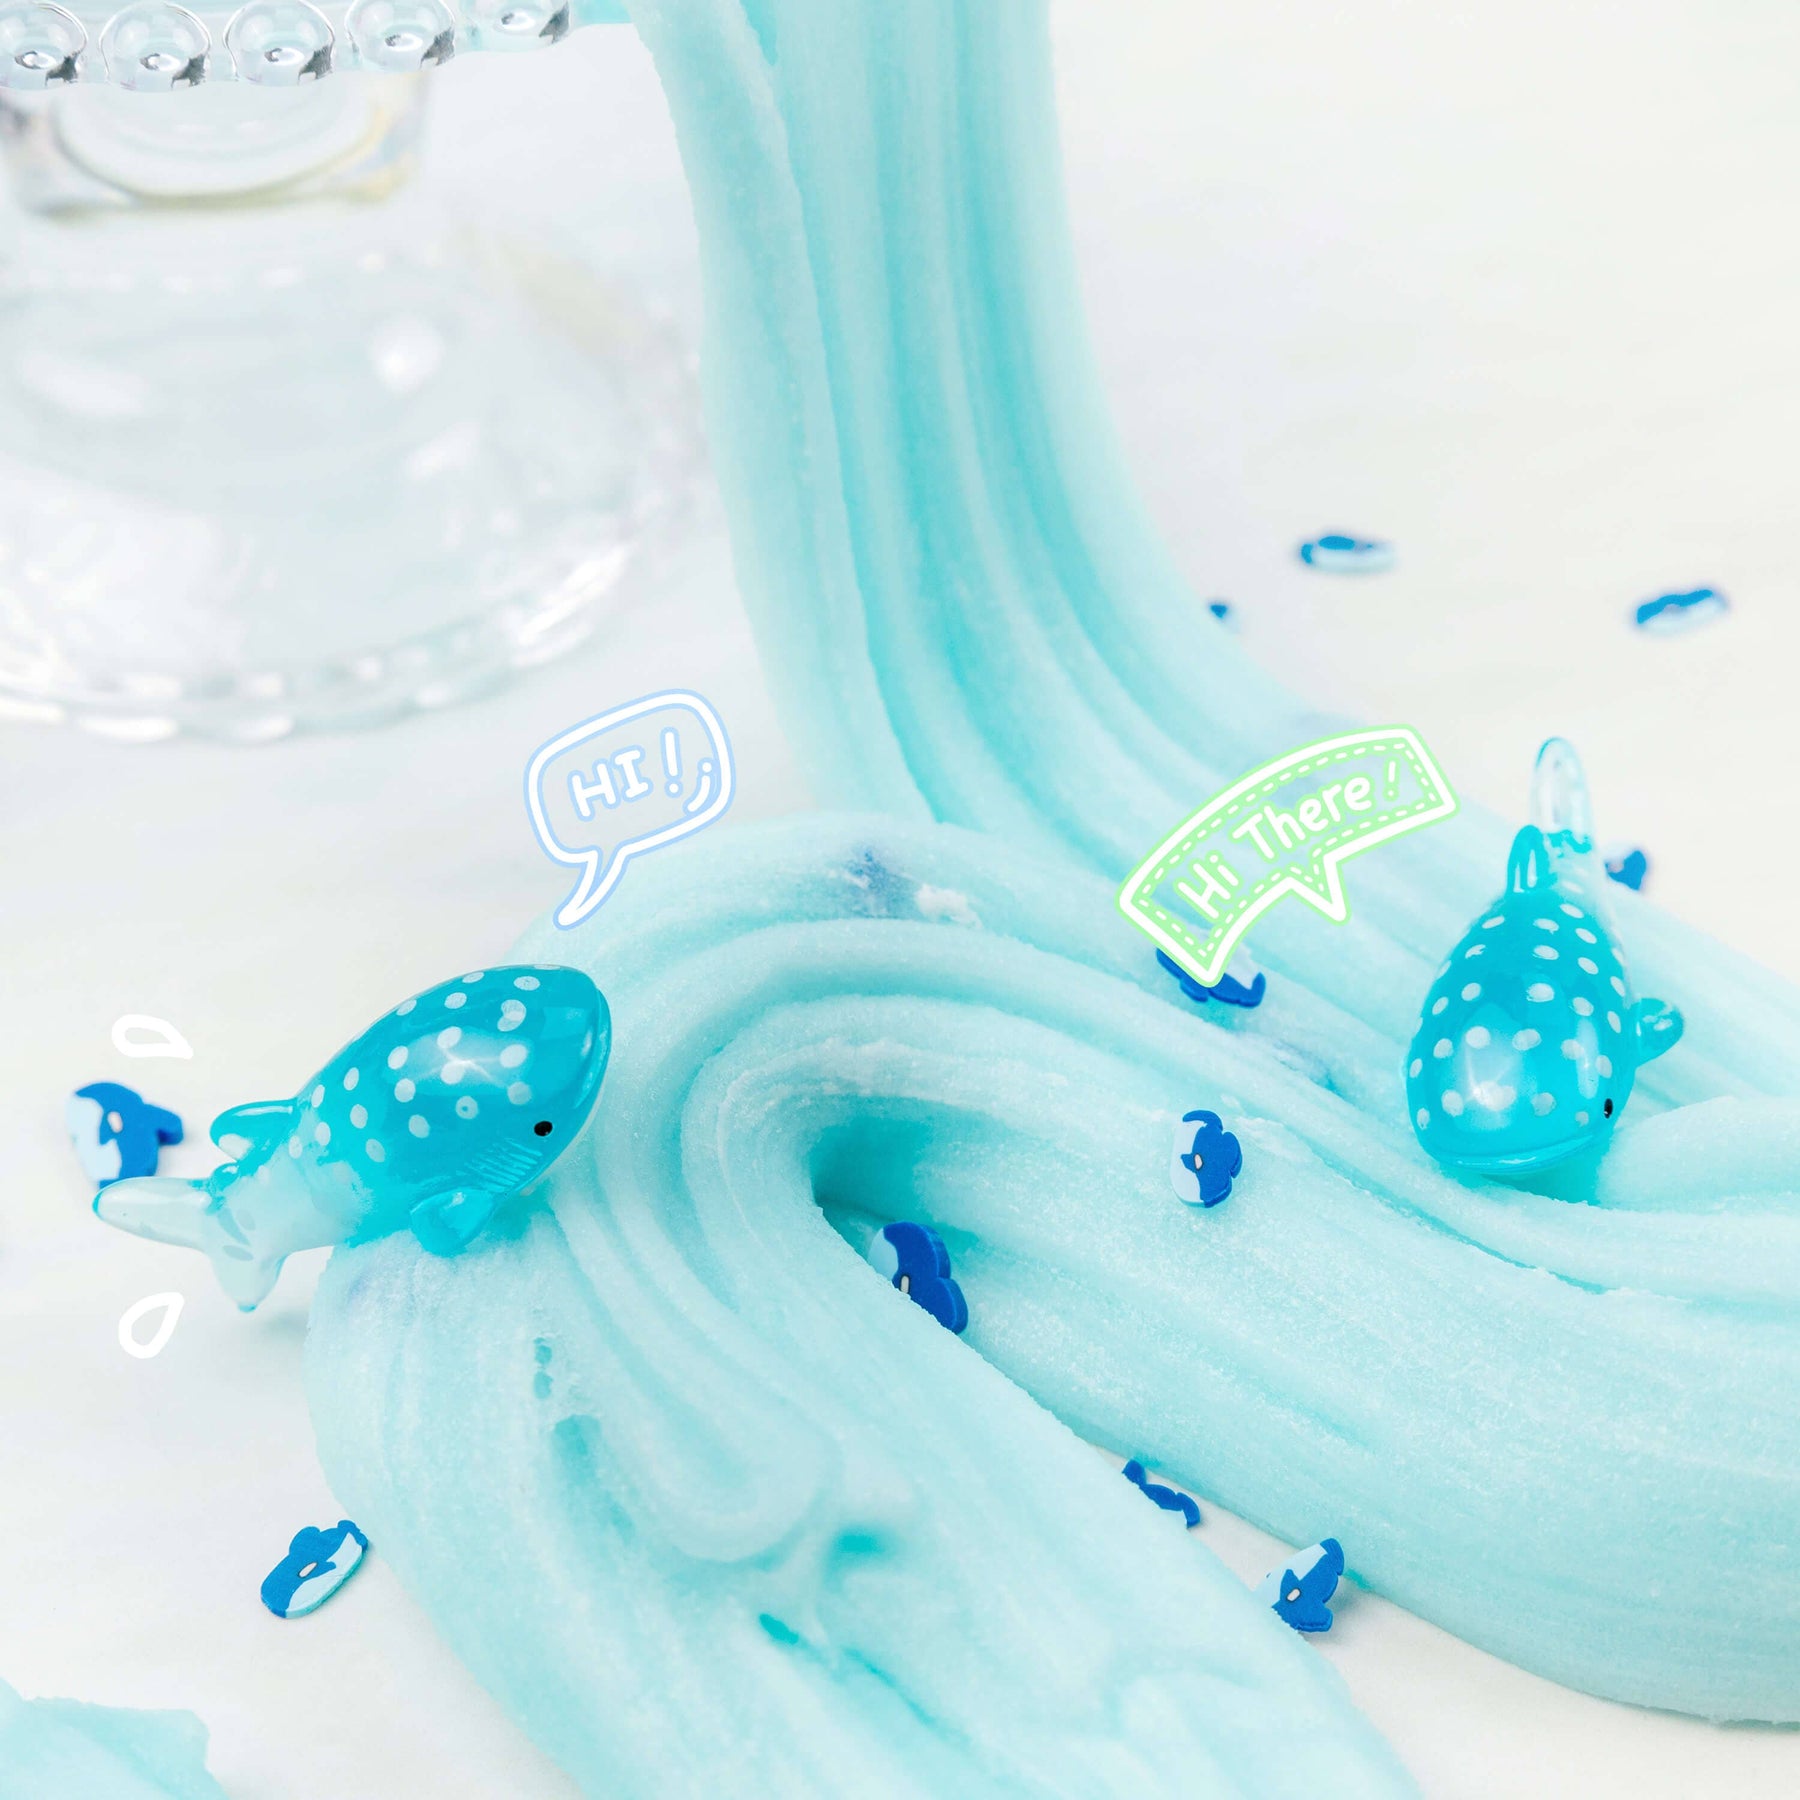 Gummy Shark Jelly Creme Slime with shark fimo slices, whale shark charms, and Meringue Slime swirls, creating a cool, creamy texture scented like blue raspberry candy and marshmallow cream.